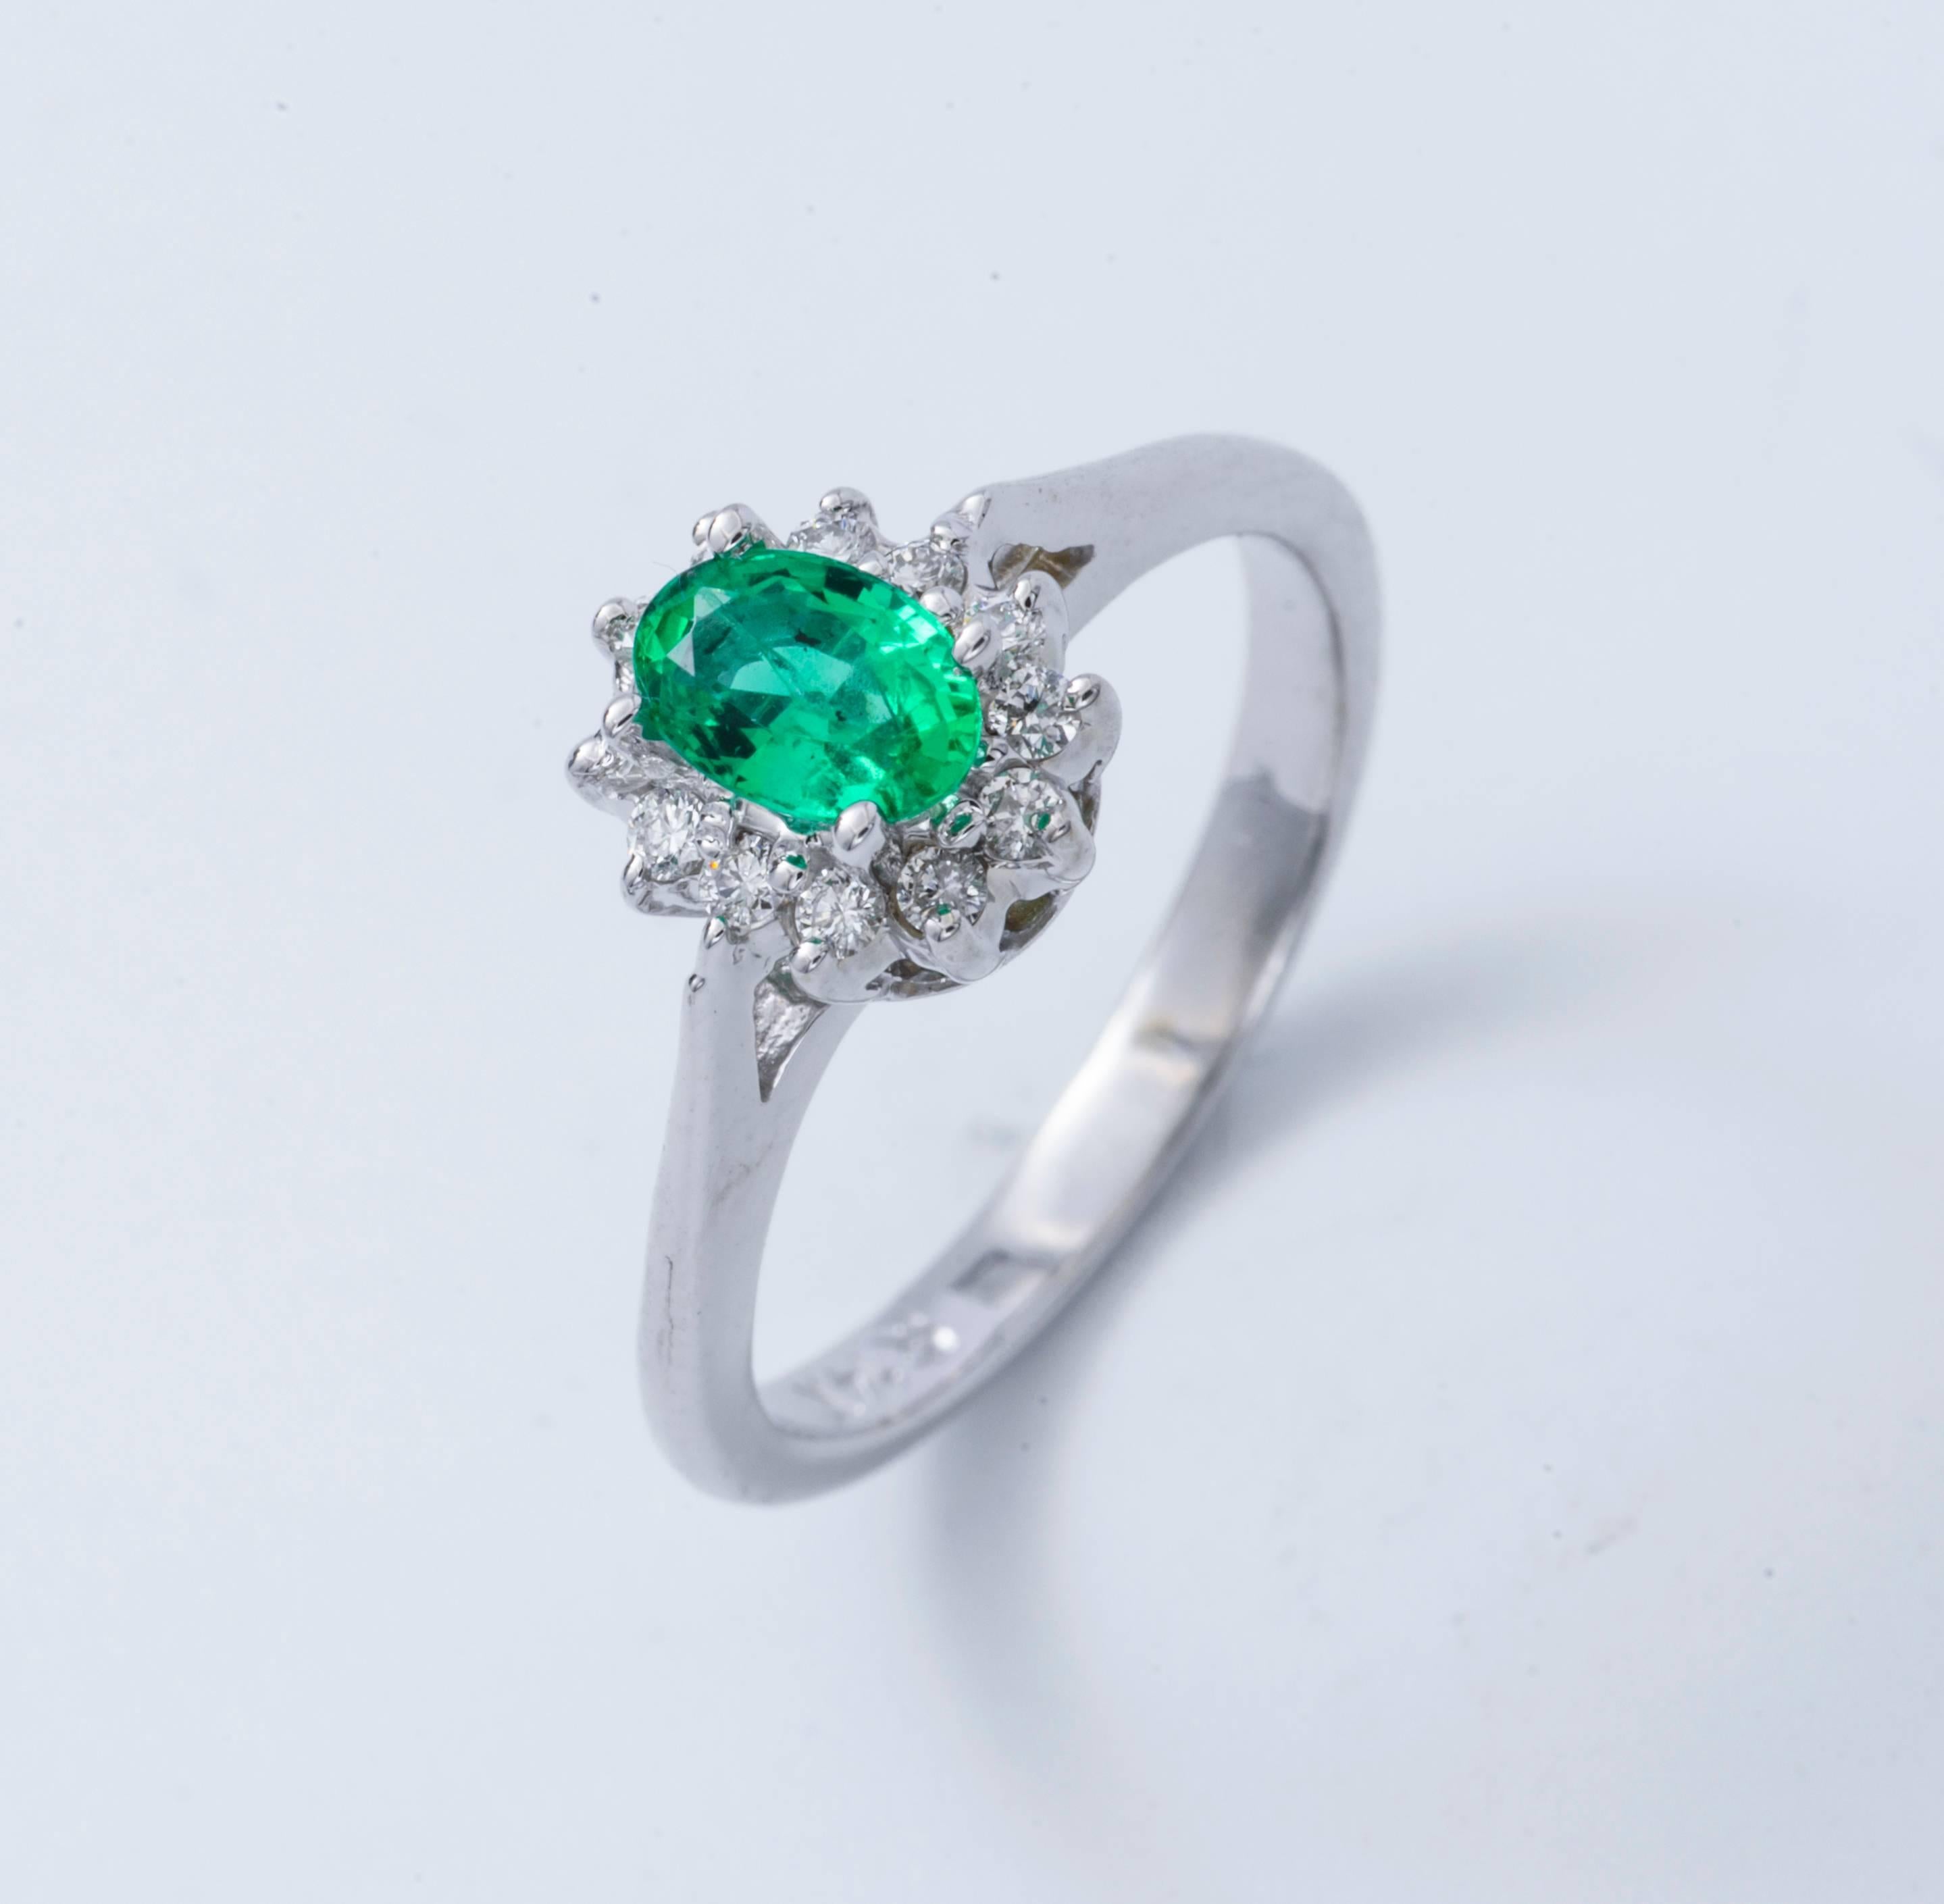 Material: 14k White Gold
Gemstone Details: 1 Oval Shape Emerald approximately 0.43ct. 6x4  mm
Diamond Details: Approximately 0.16 ctw of diamonds. Diamonds are H in color and SI in clarity.
Ring Size: 6.50 (can be sized)